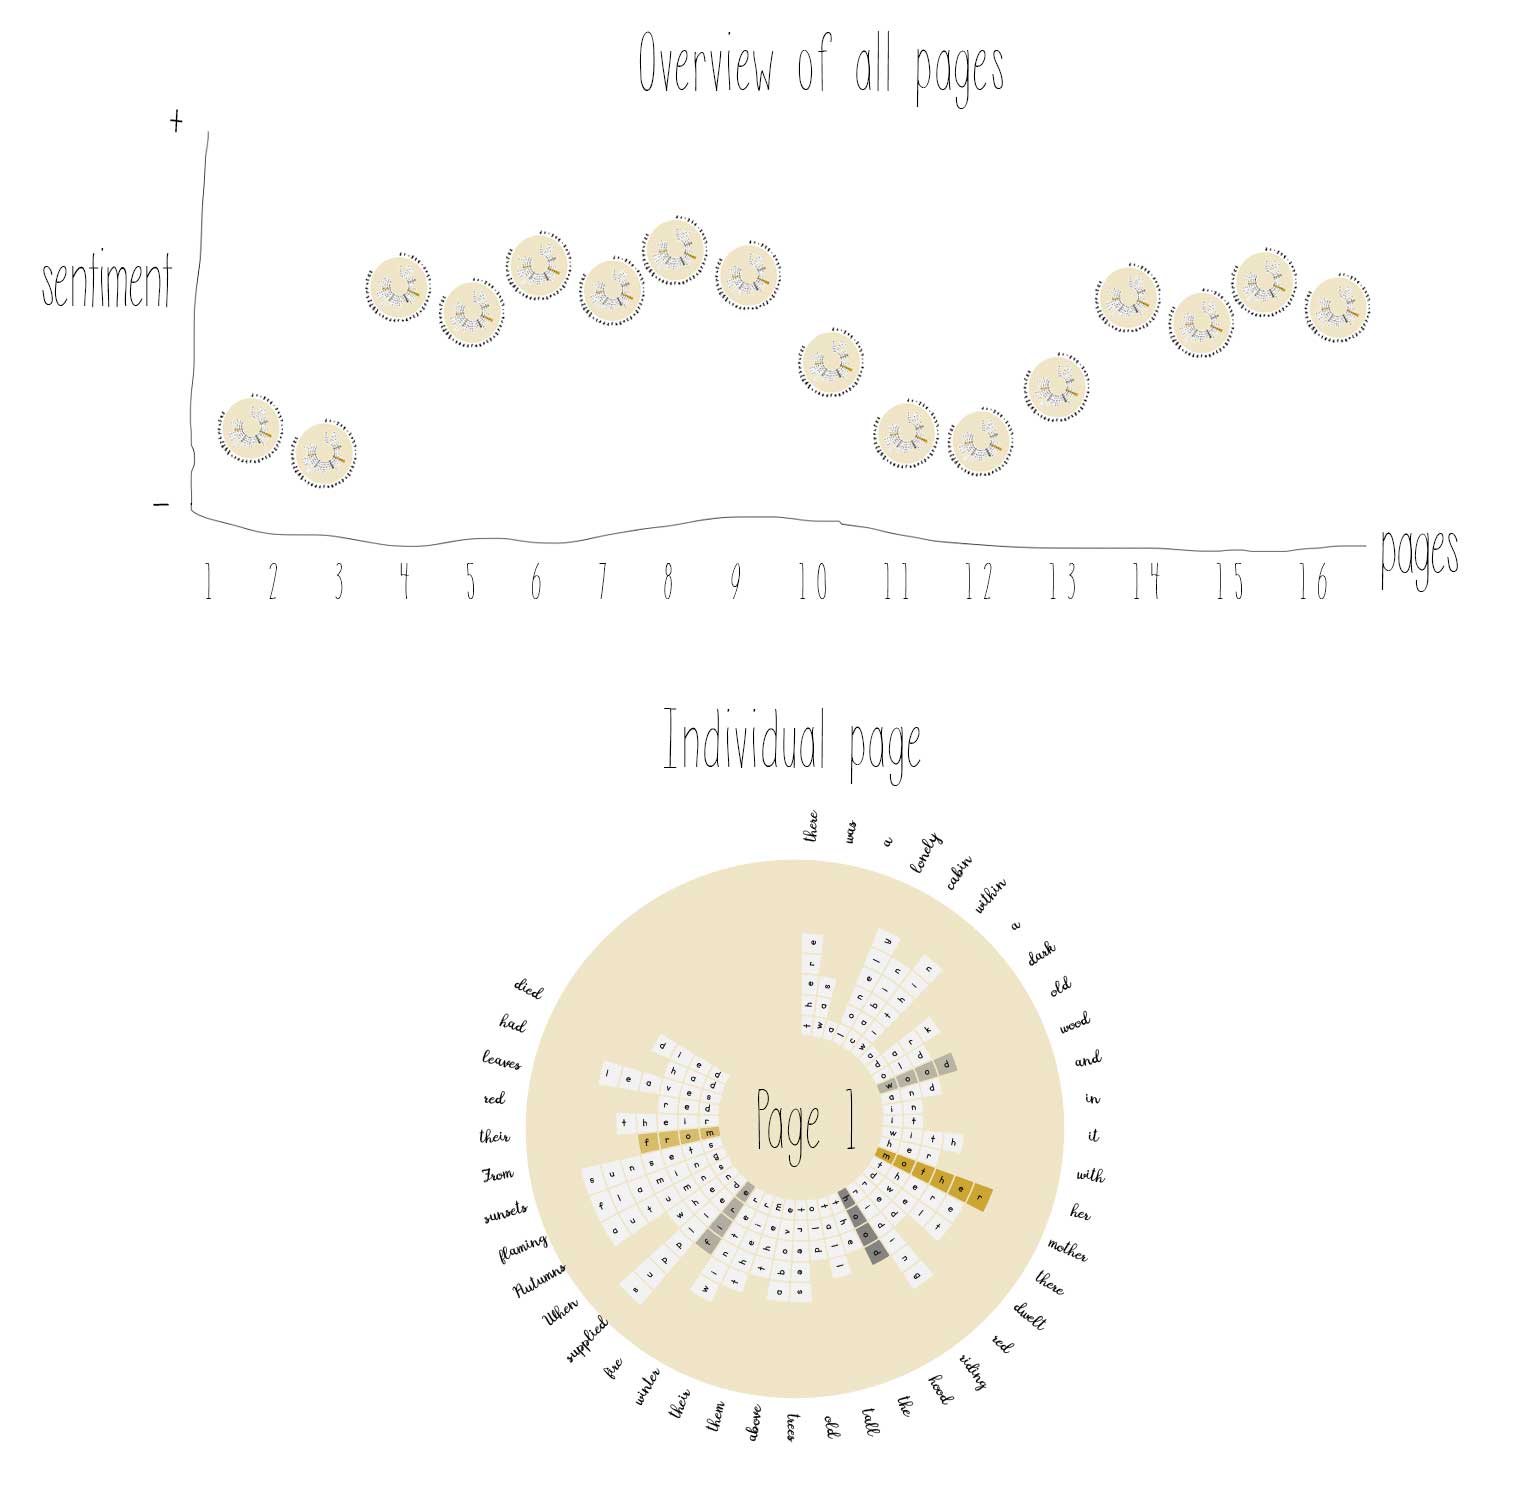 top: bubble chart drawn in illustrator with positive and negative sentiment on vertical y axis and pages on horizontal x axis, 16 circles depicting pages with words circling laid out horizontally with sentiment colours in circle and words, bottom: enlarged view of a circle